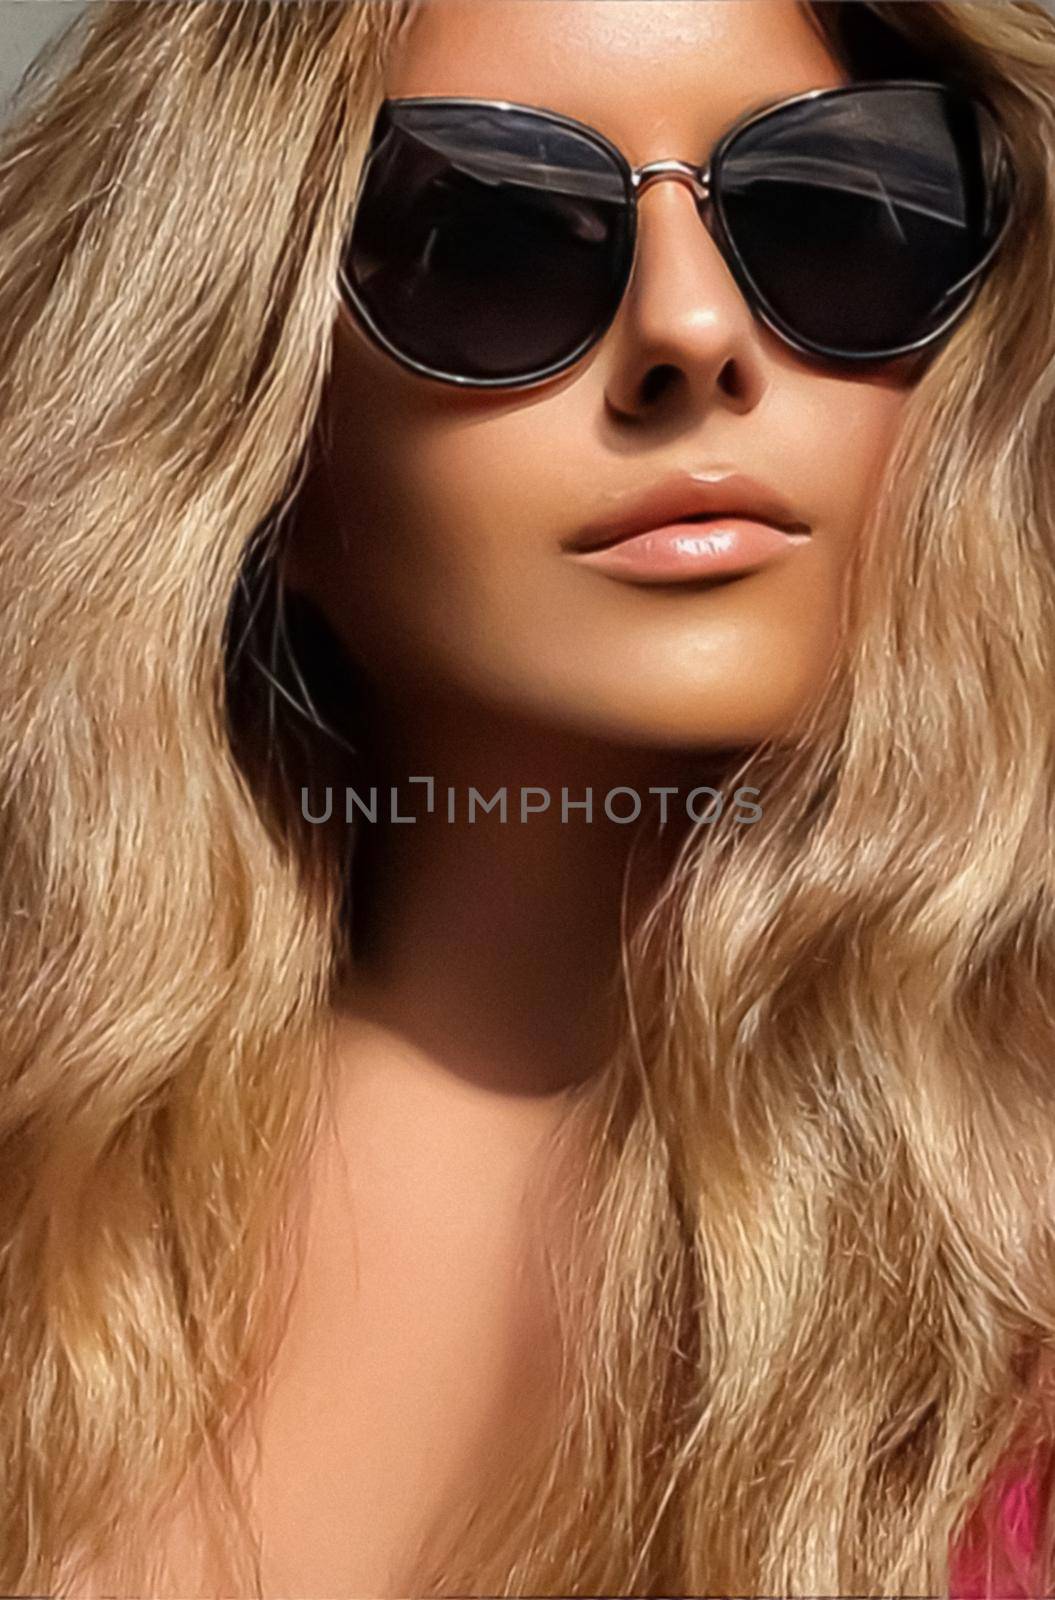 Luxury fashion, travel and beauty face portrait of young blonde woman, wearing chic sunglasses, suntanned skin and long beach waves hairstyle, summer accessory and glamour style by Anneleven